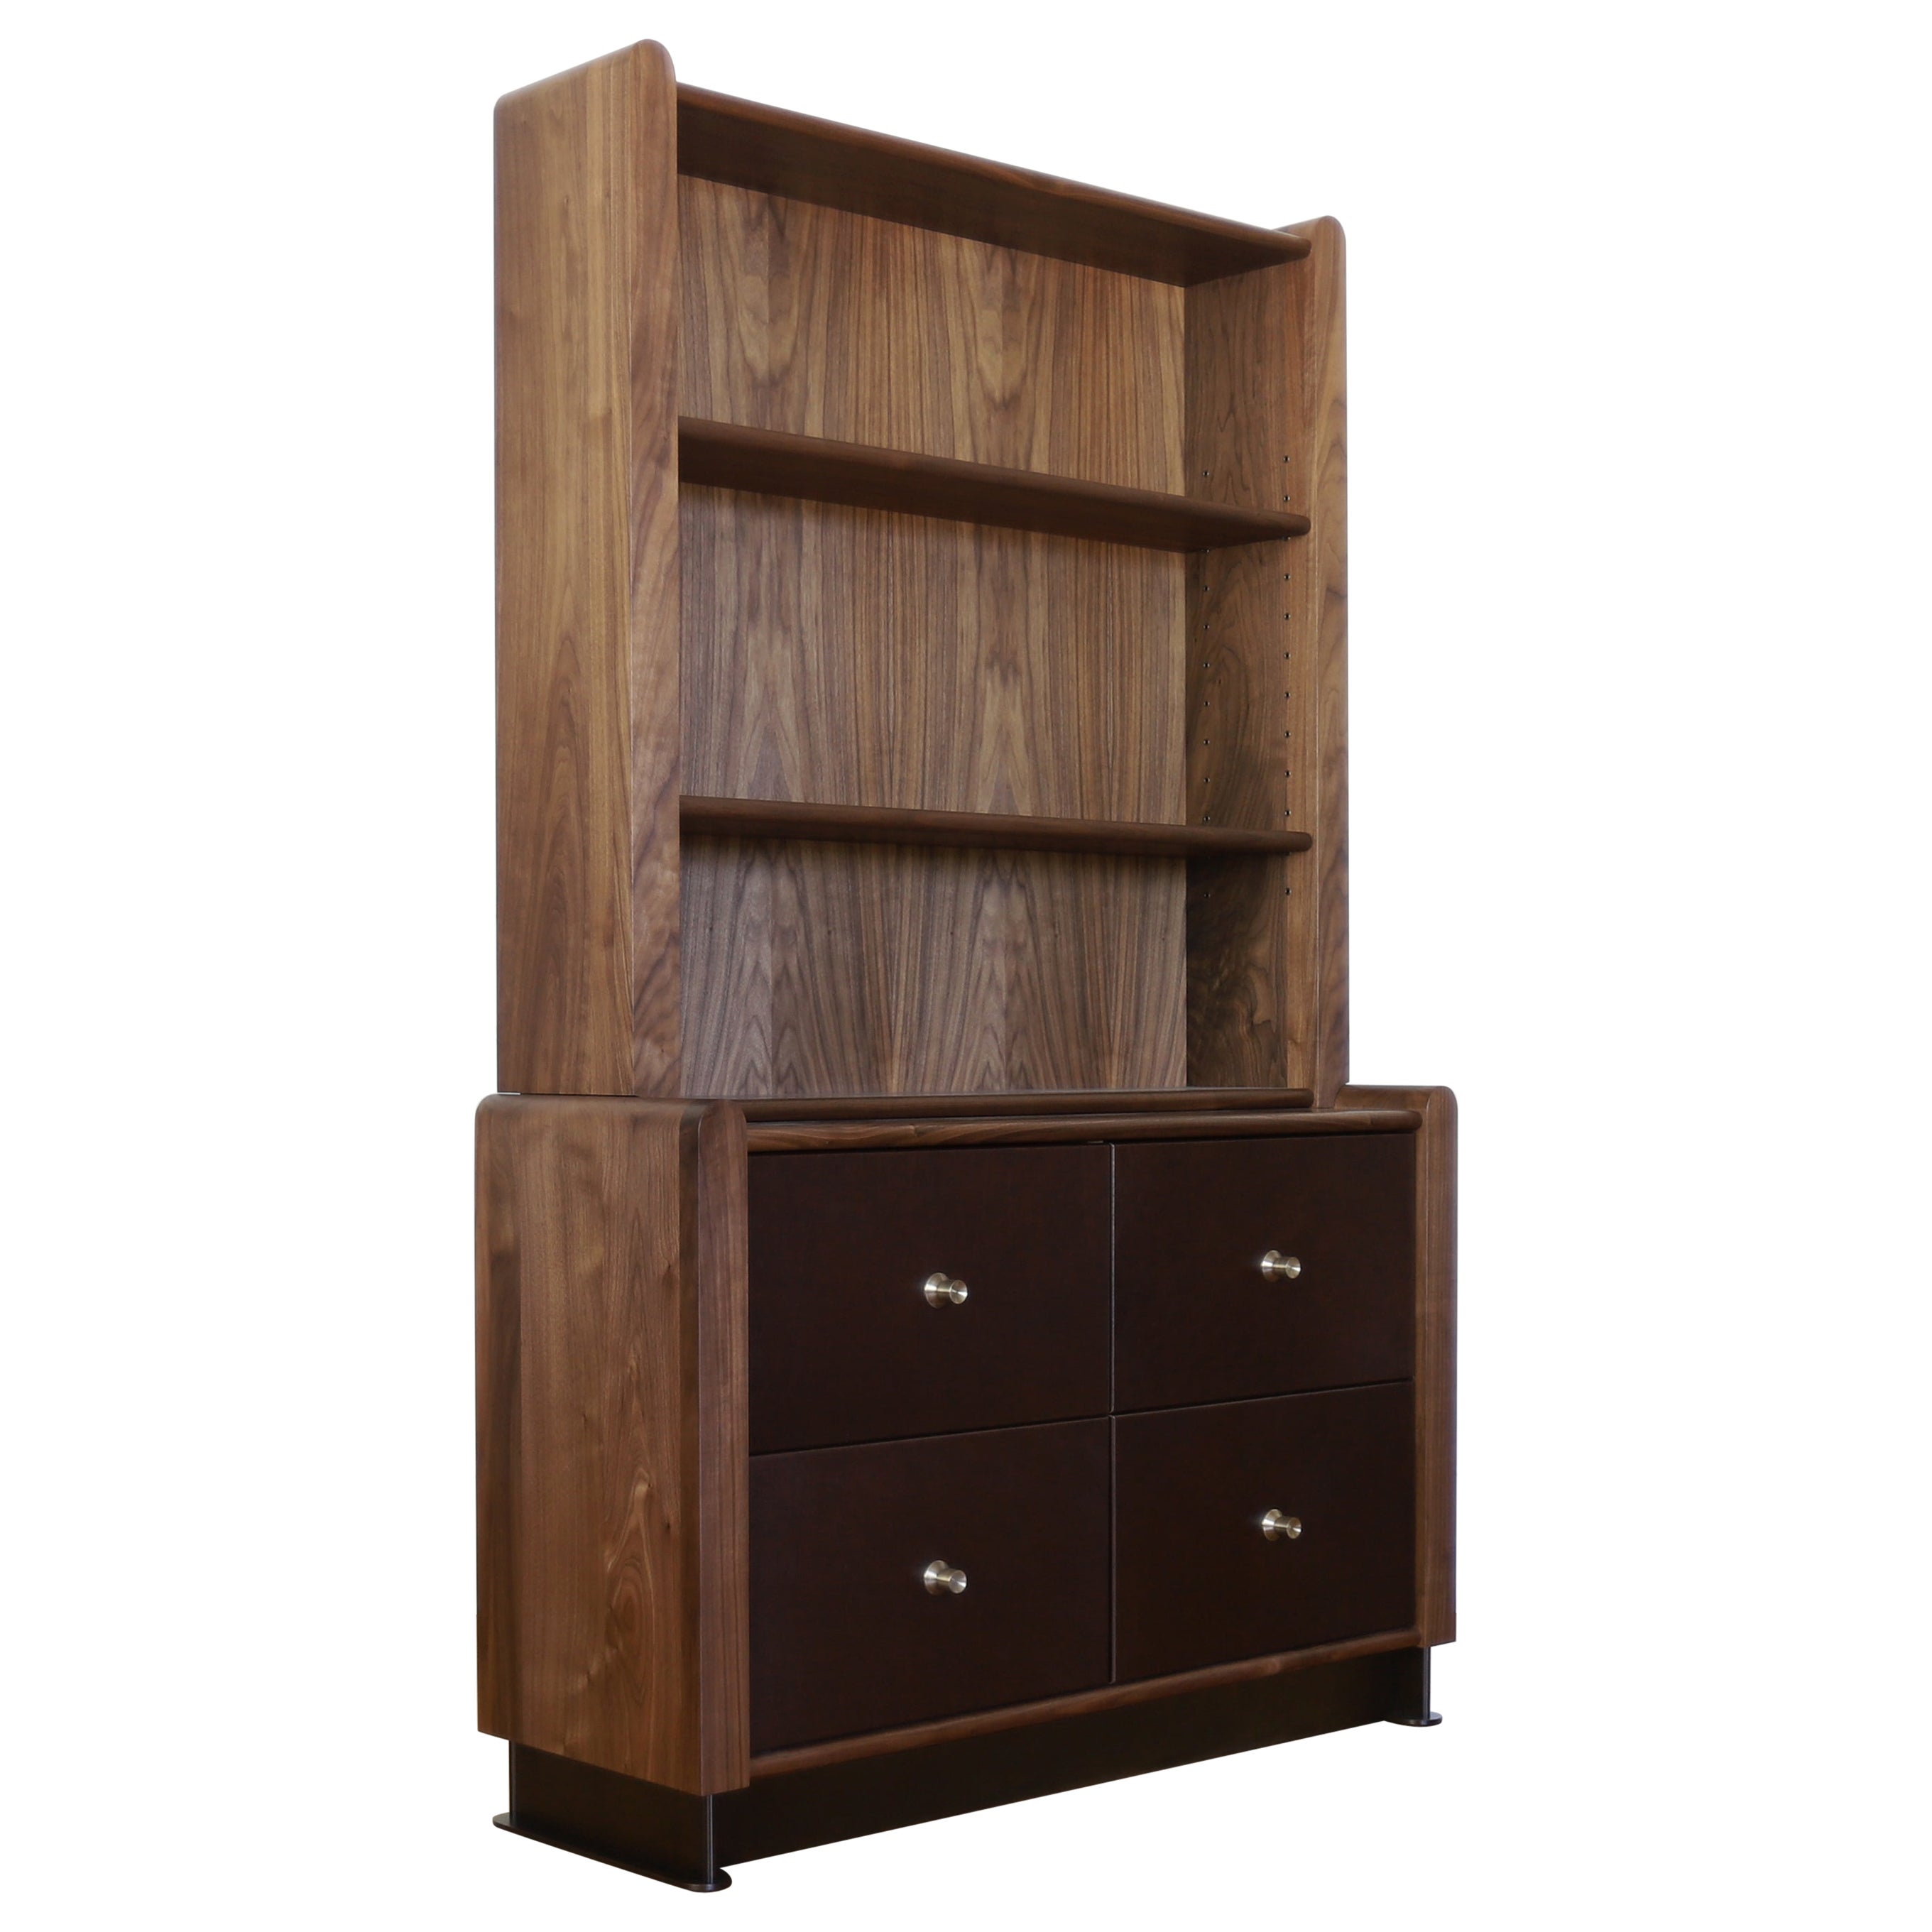 Ready to ship Alton Hutch by Crump and Kwash / Modern solid wood bookcase For Sale